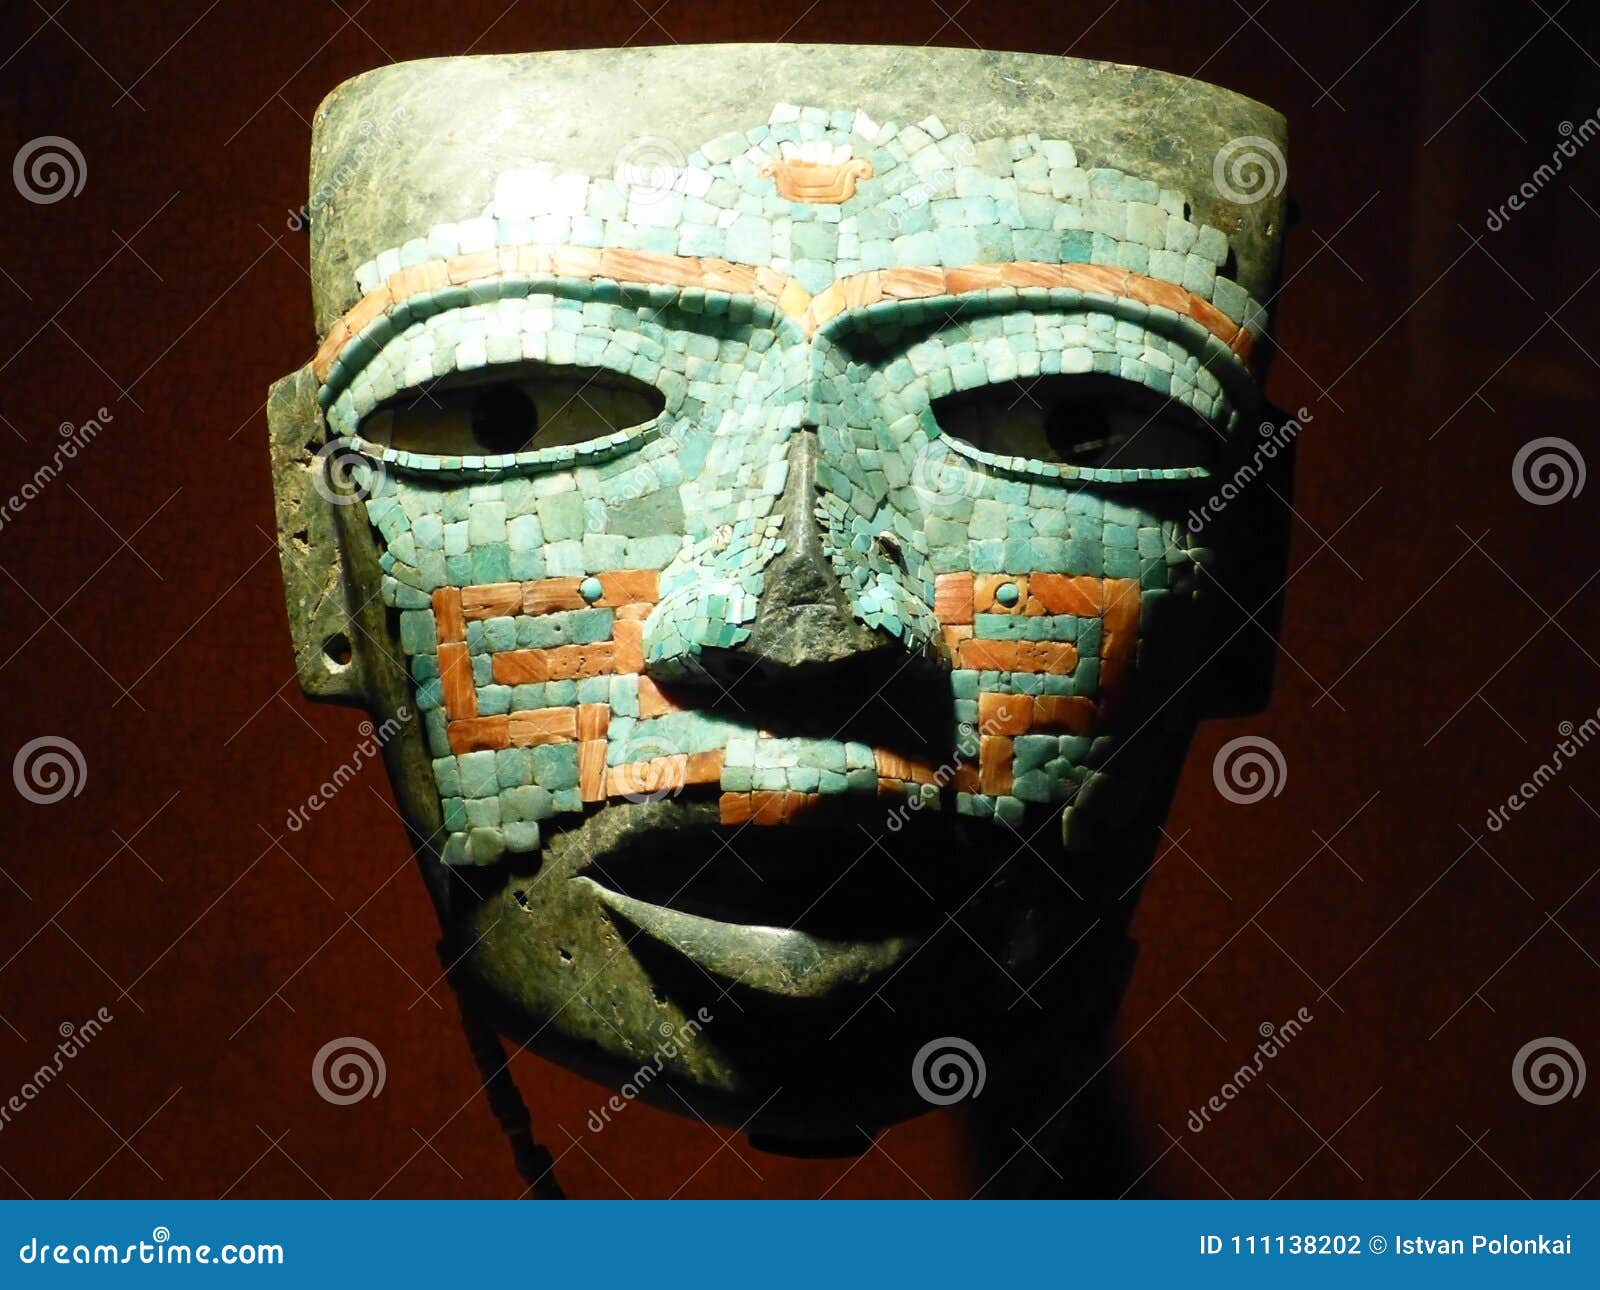 Home & Living Aztec and Mayan sculptures of Mexican culture Teotihuacan ...